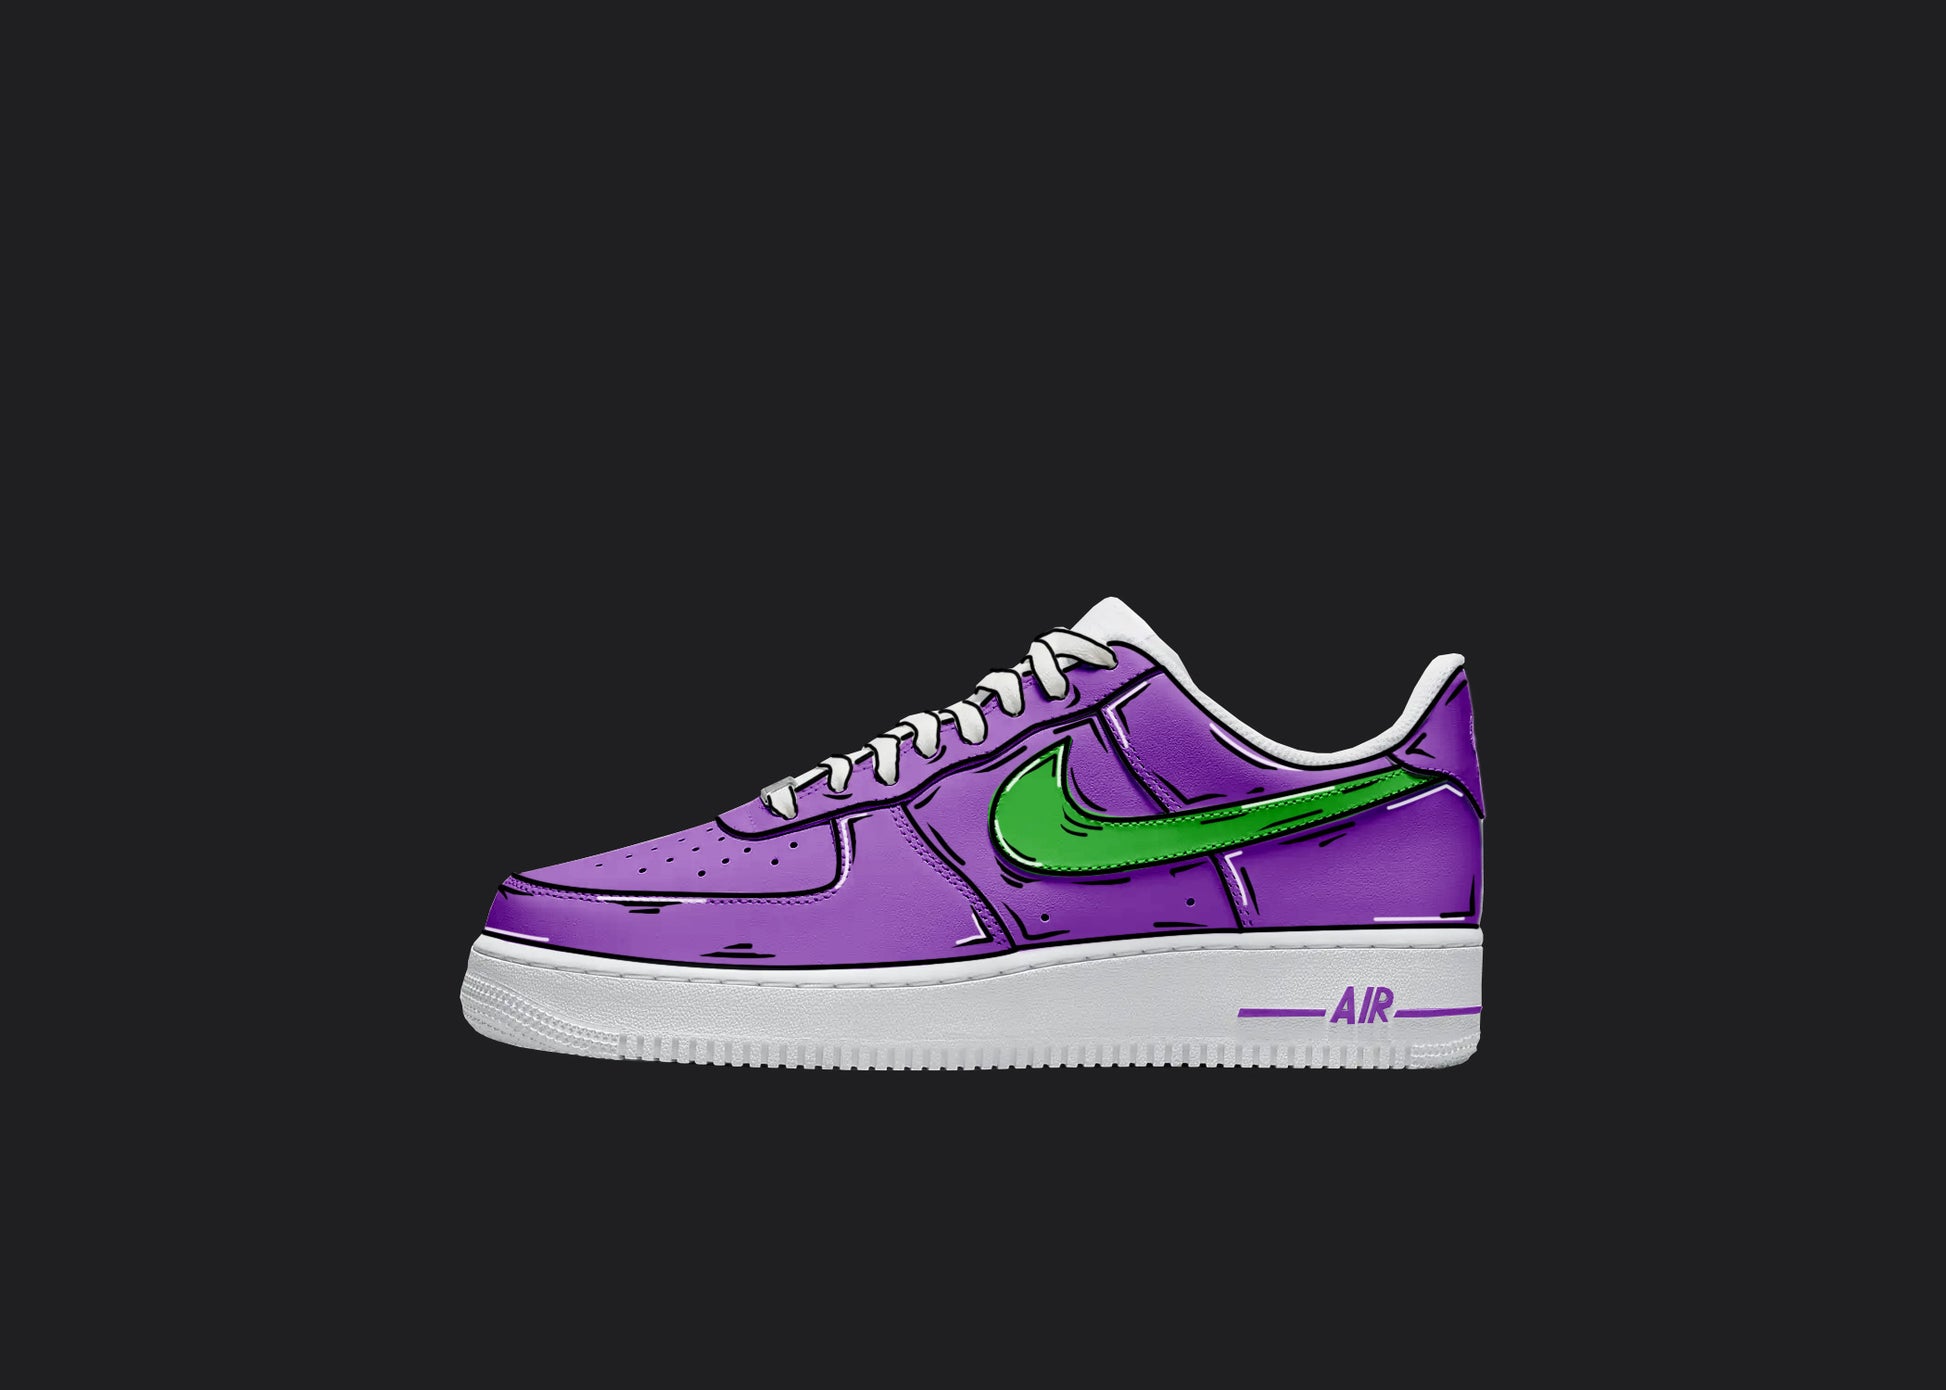 purple and green custom air force 1 sneakers with cartoon hand painted details all over the custom design